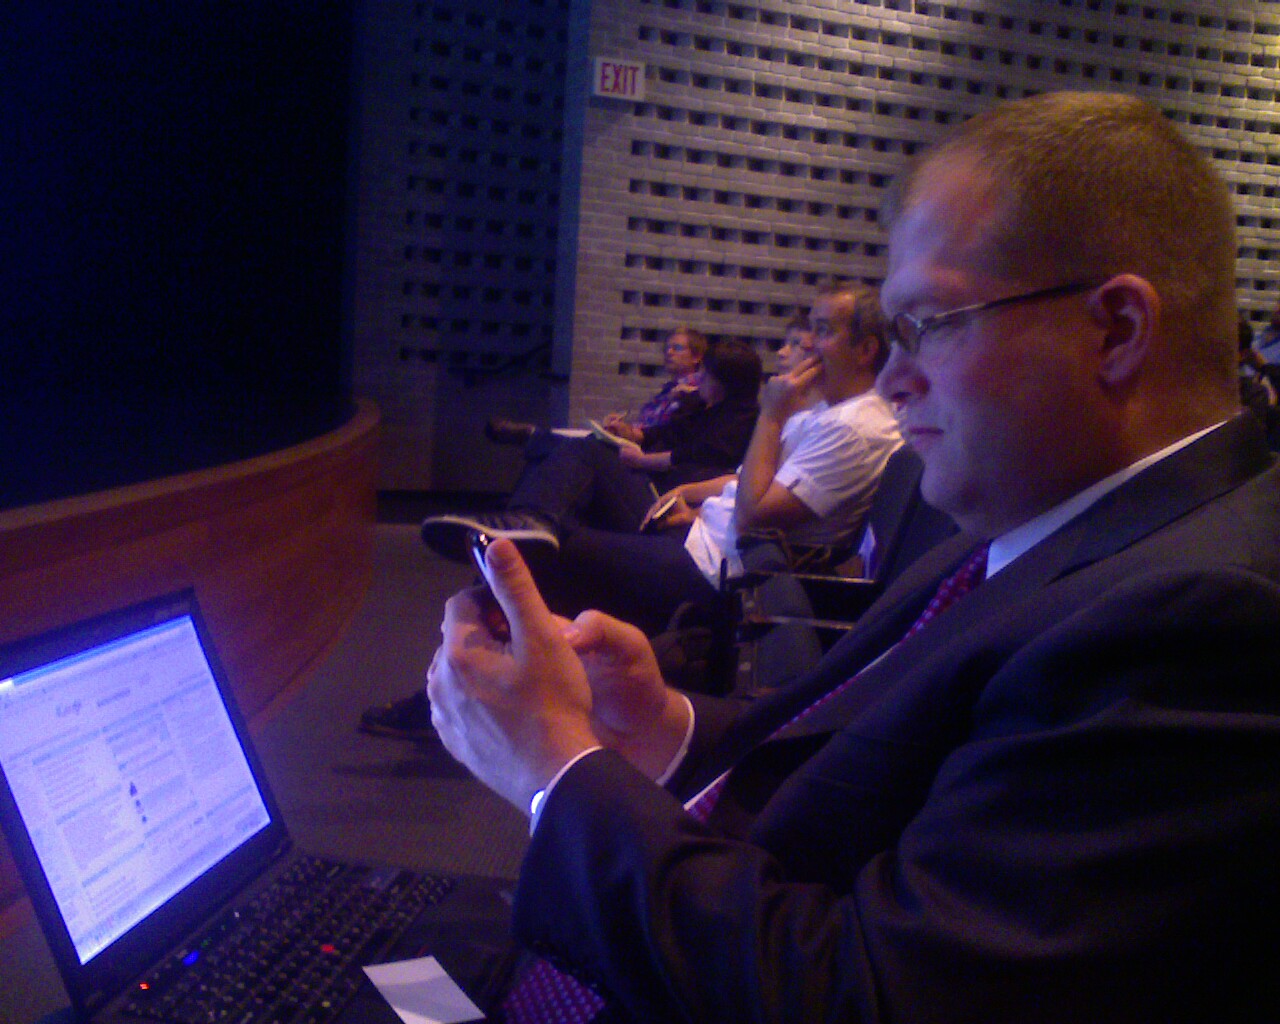 Rich Cherry, Director, Balboa Park Online Collaborative on multiple devices at the SFMOMA-hosted event 